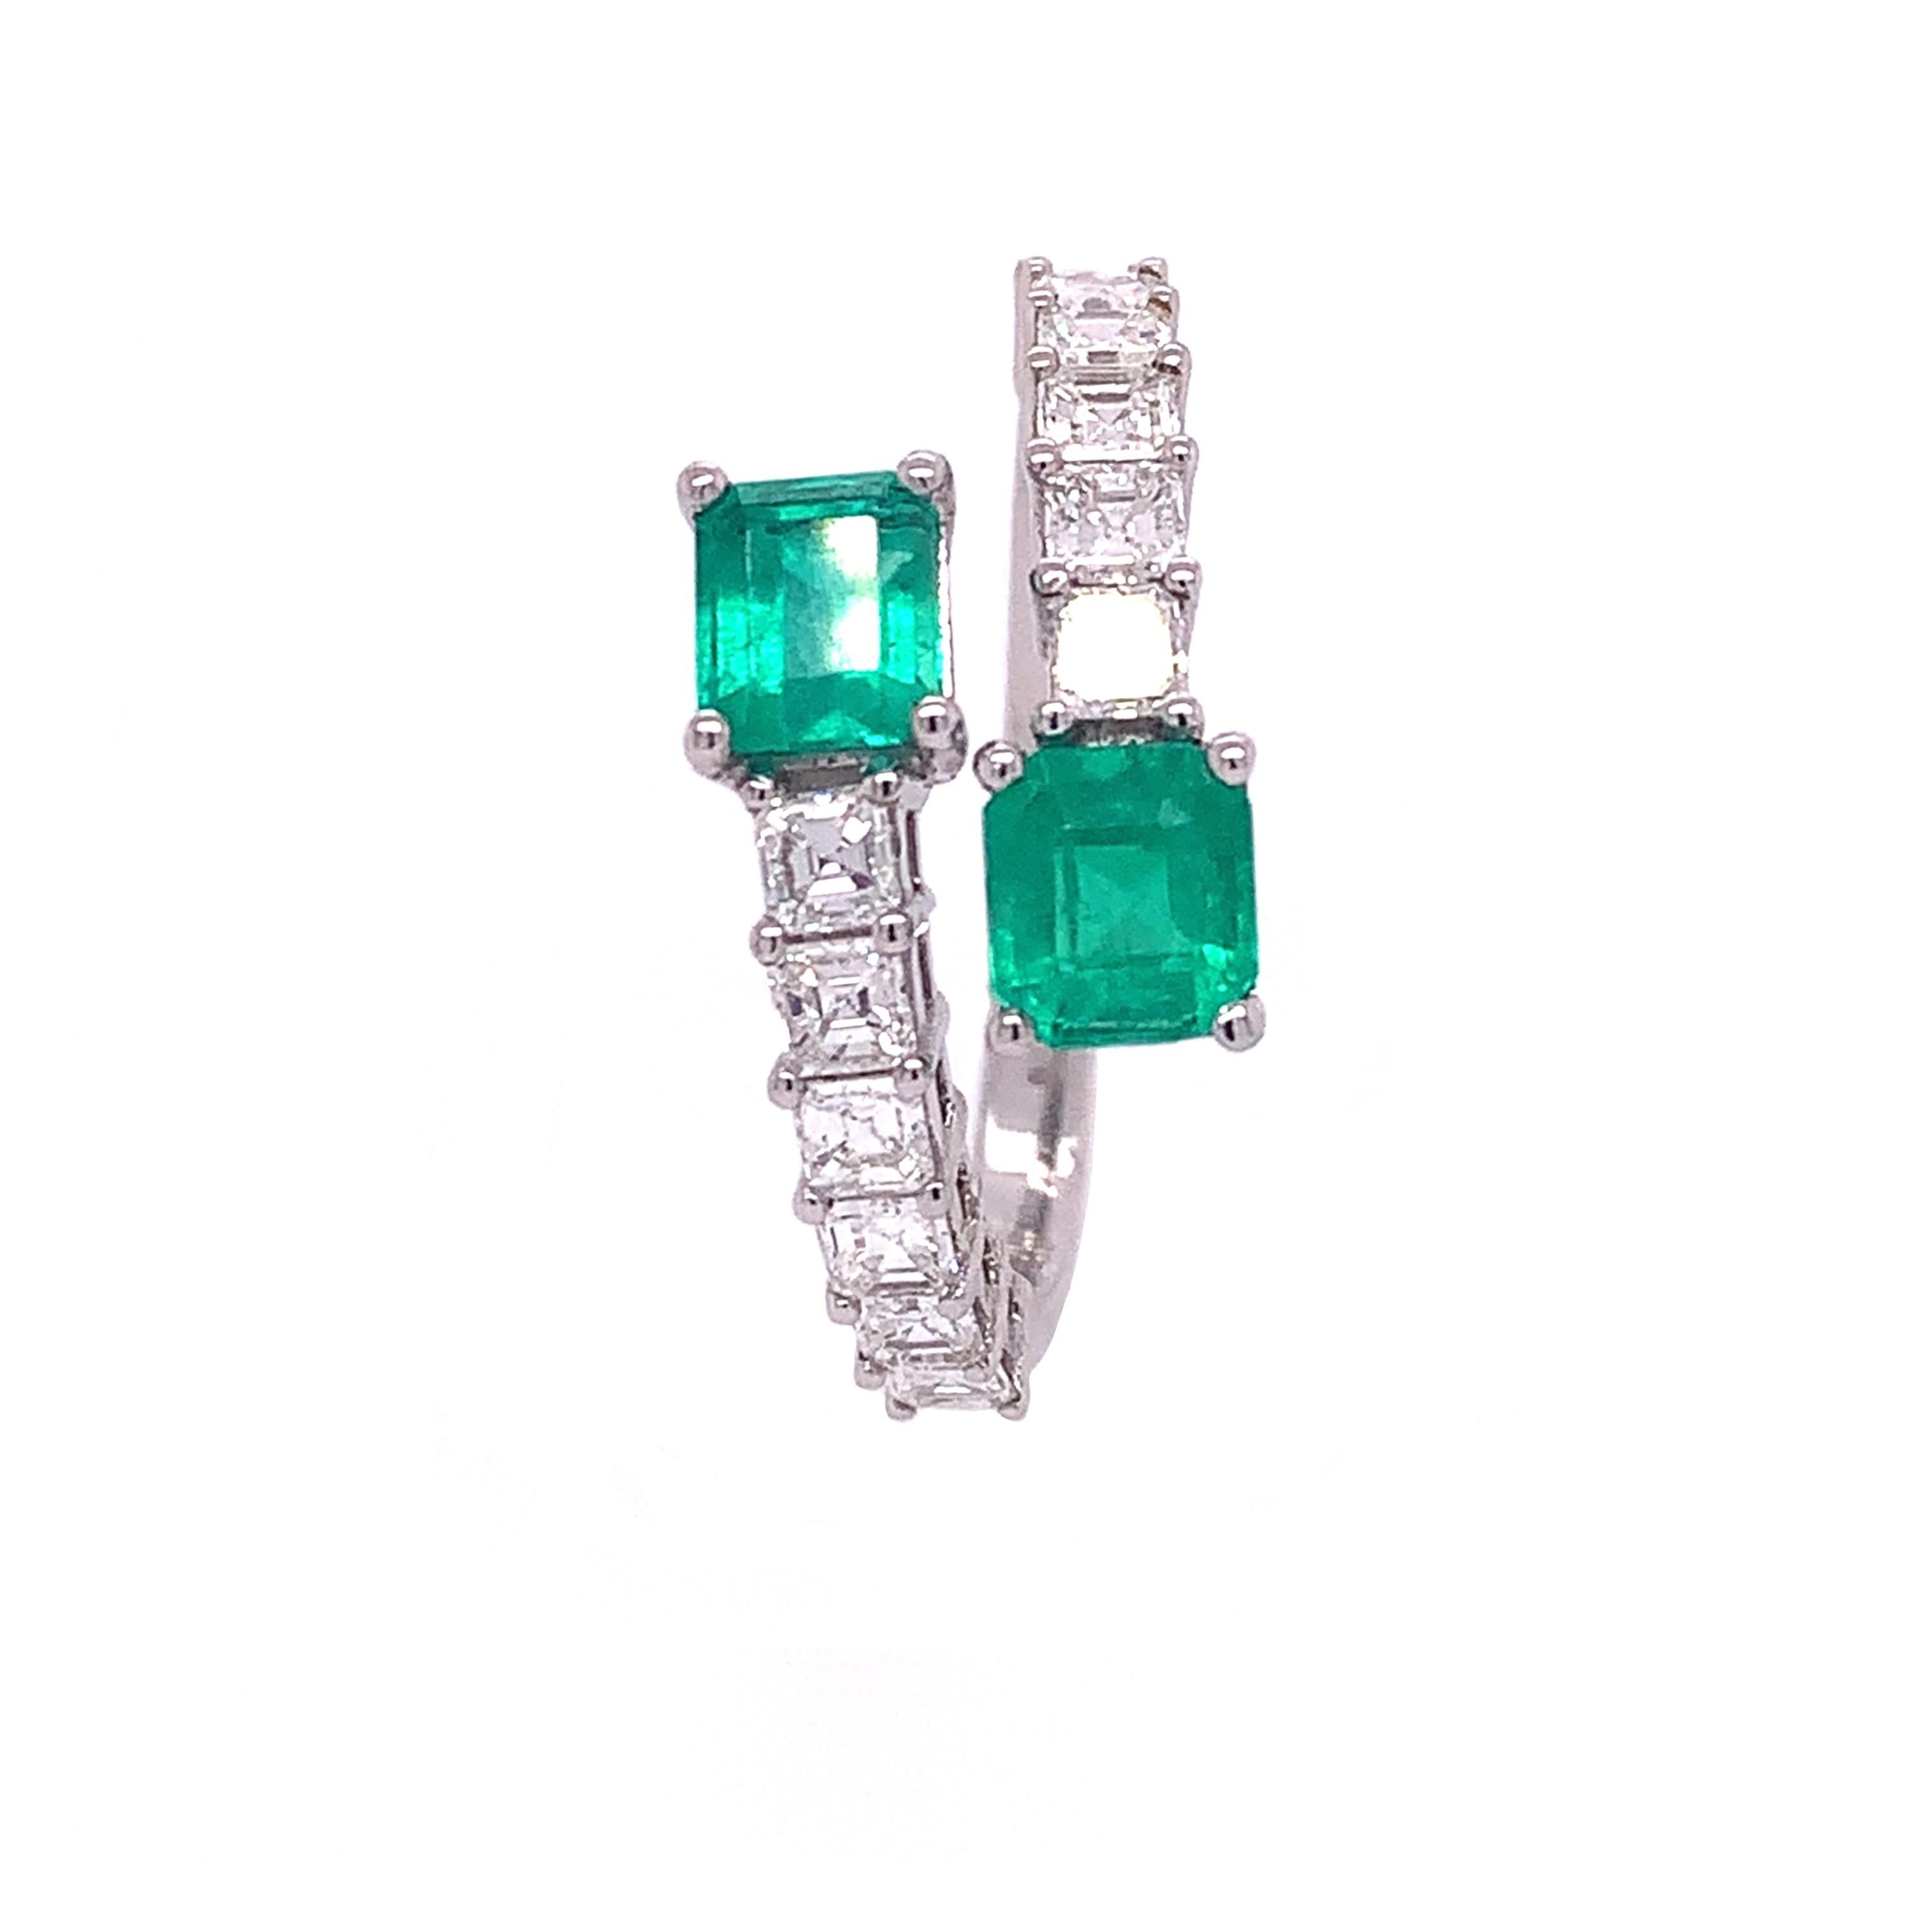 18K White Gold
Emerald: 1.17ct total weight.
Diamond: 0.96ct total weight.